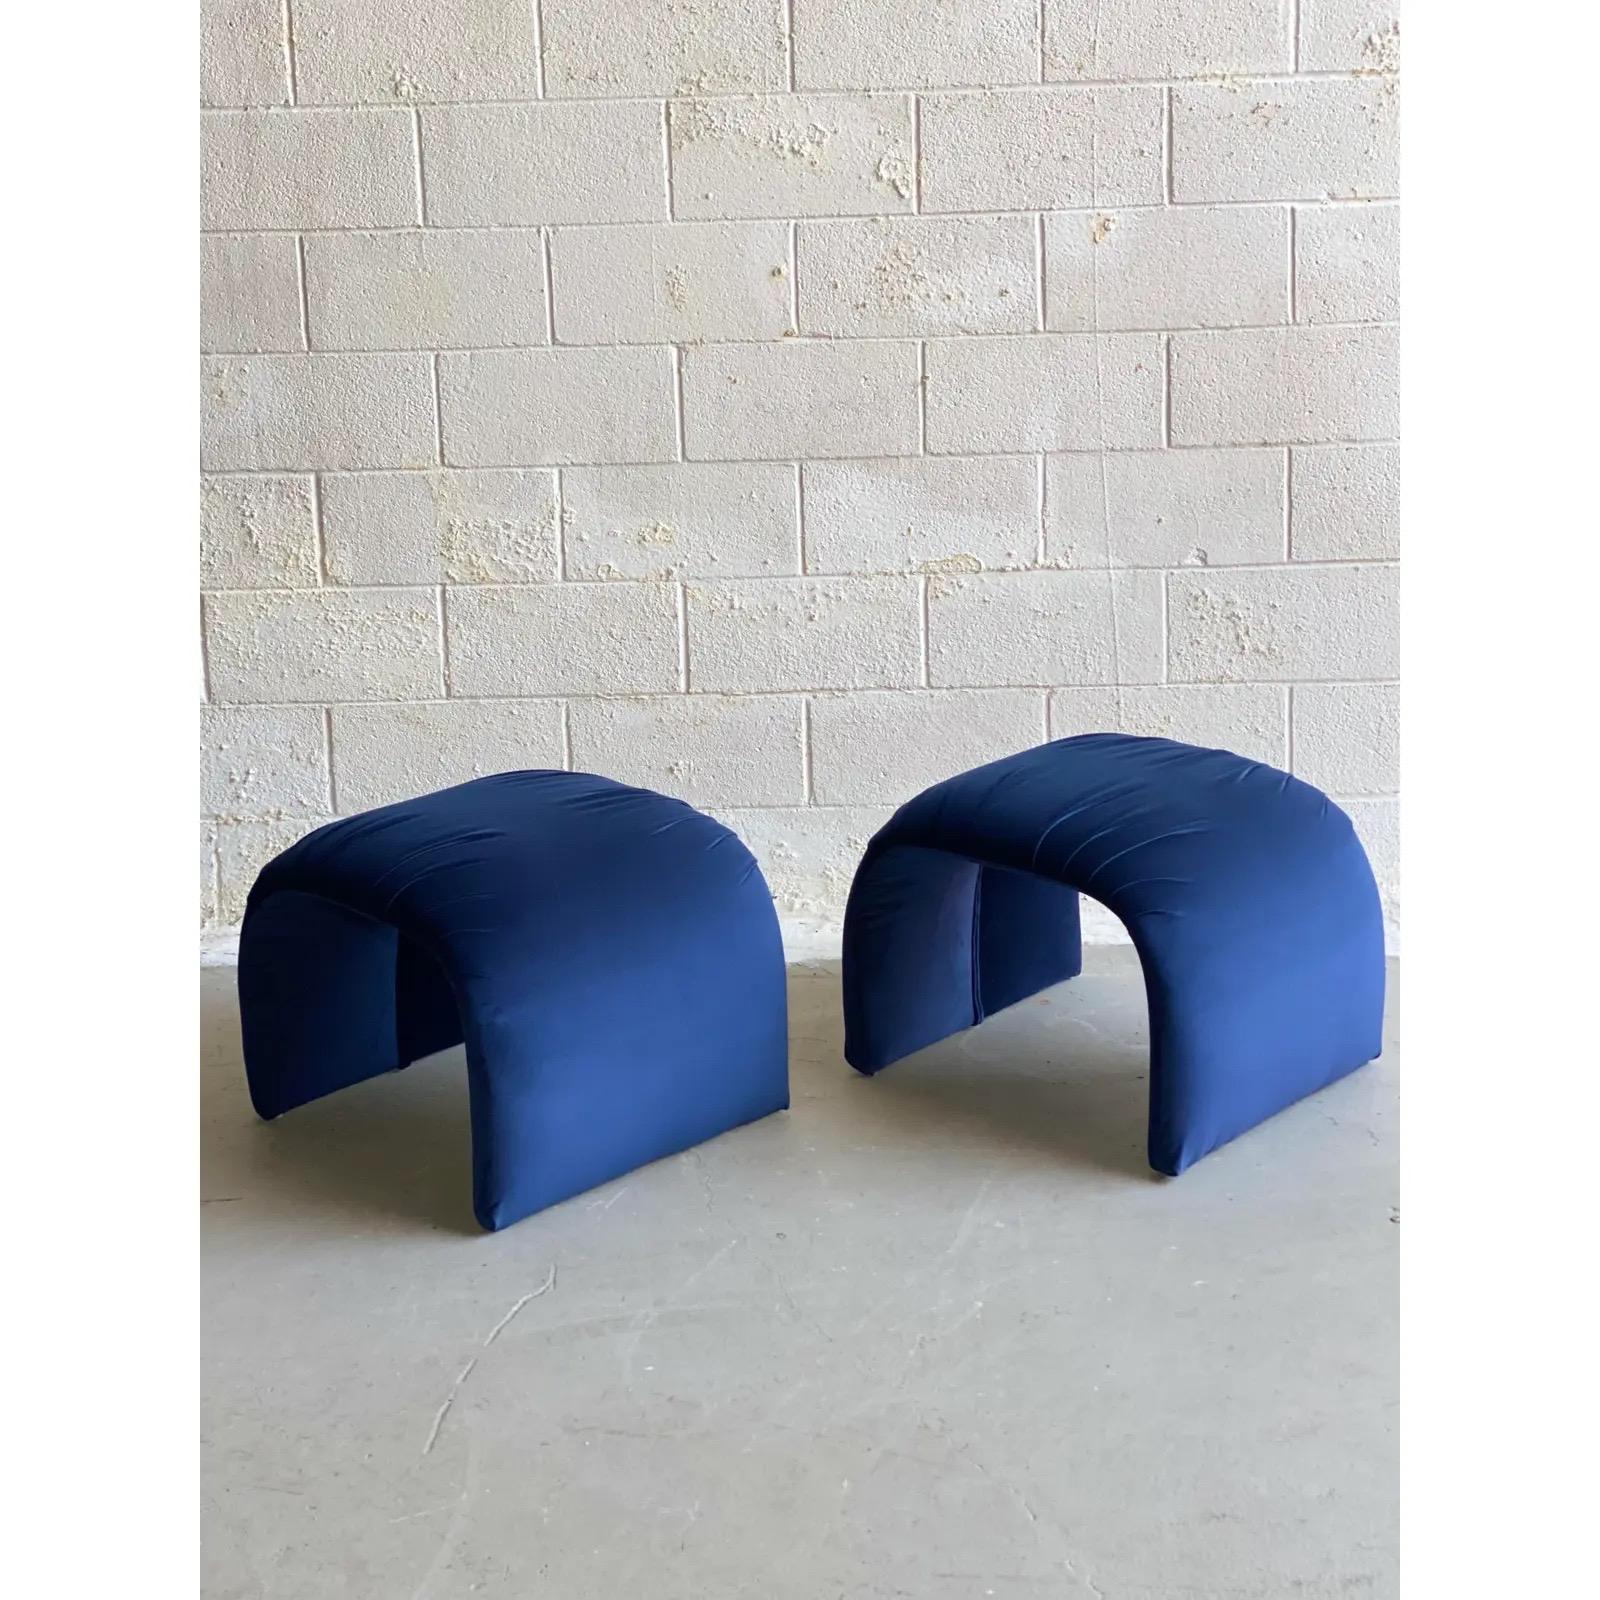 1980s Vintage Waterfall Blue Upholstered Ottomans, a Pair In Good Condition For Sale In Farmington Hills, MI